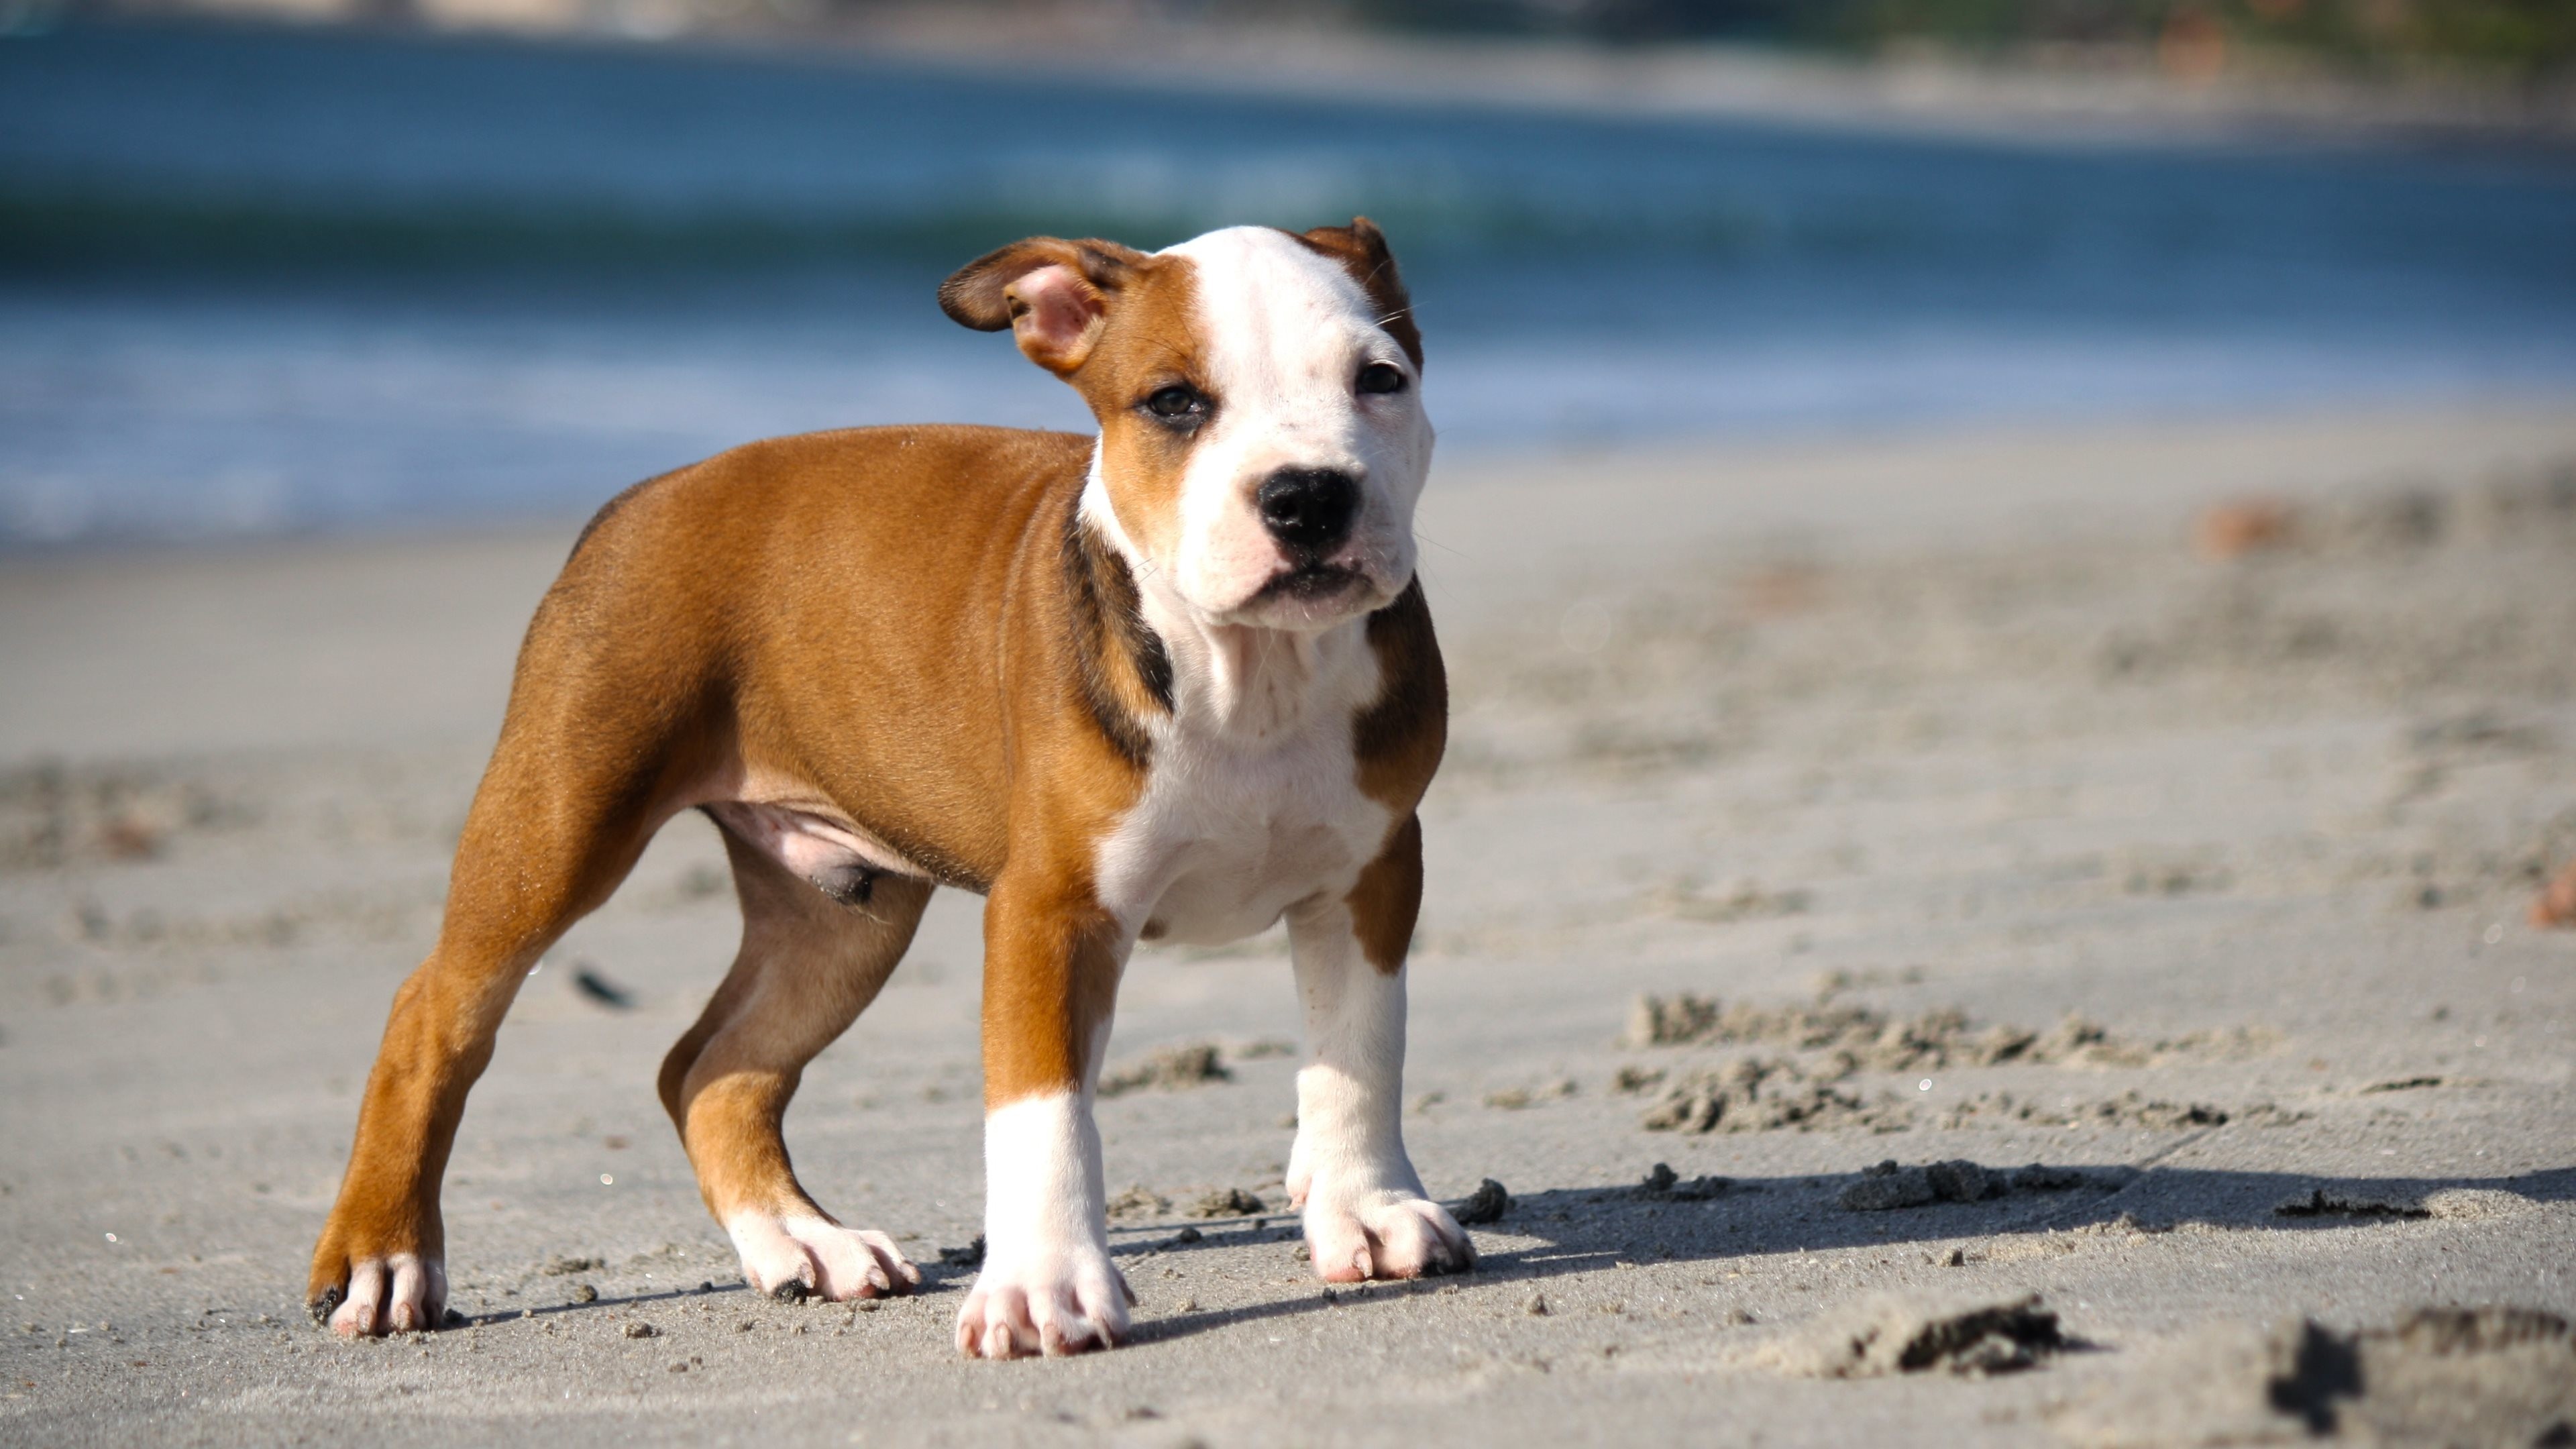 3840x2160 pitbull puppy uhd wallpapers desktop wallpapers high definition monitor  download free amazing background photos artwork 3840Ã2160 Wallpaper HD